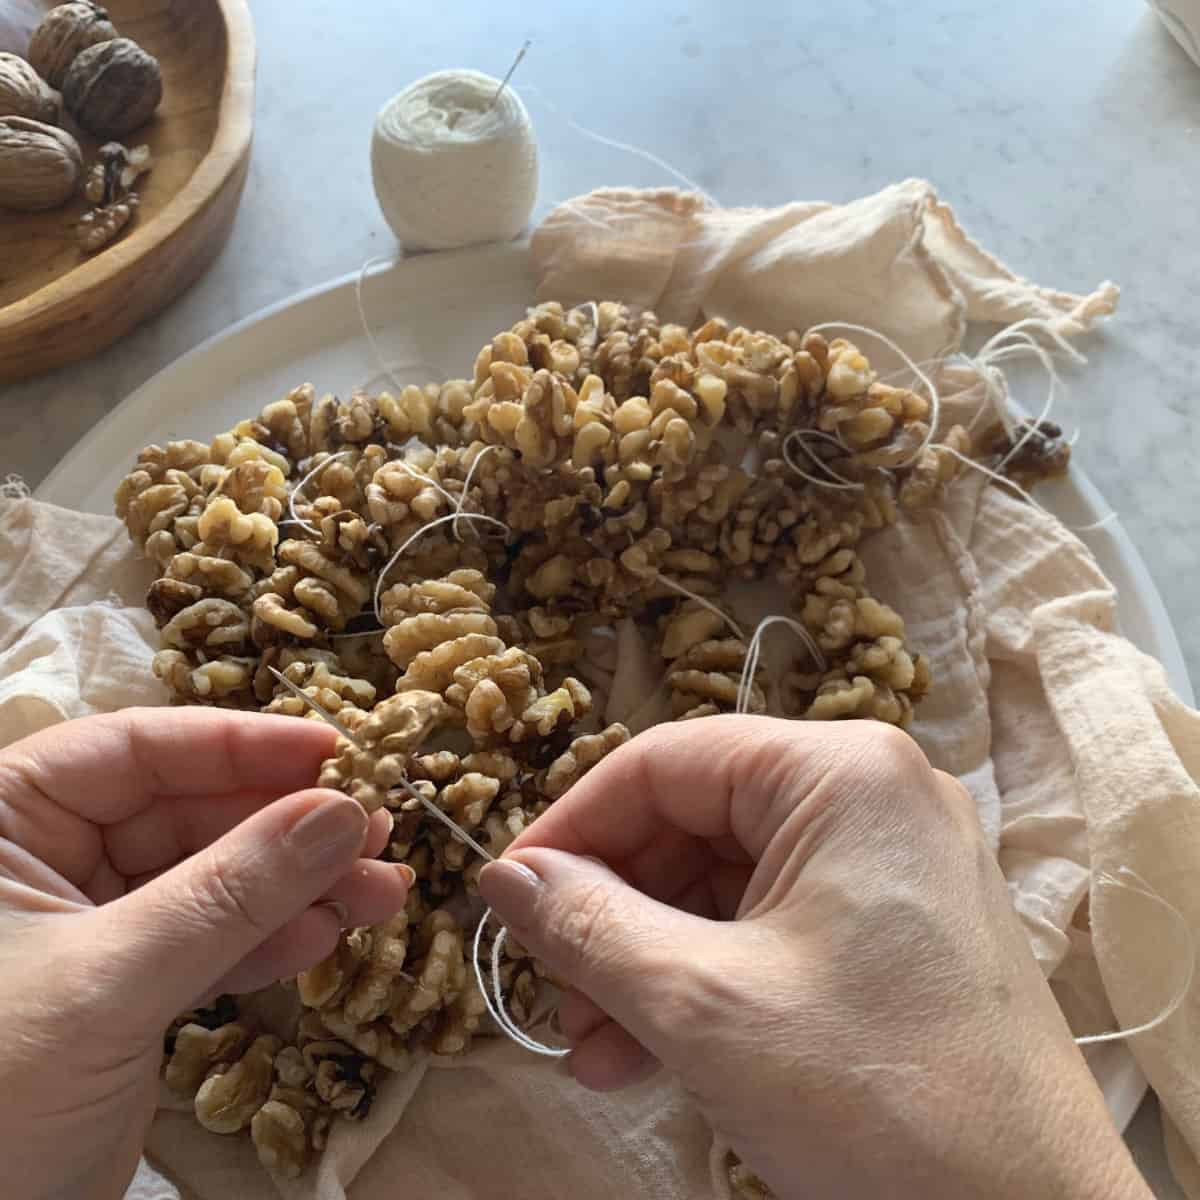 Stringing the walnuts with tread and needle. 